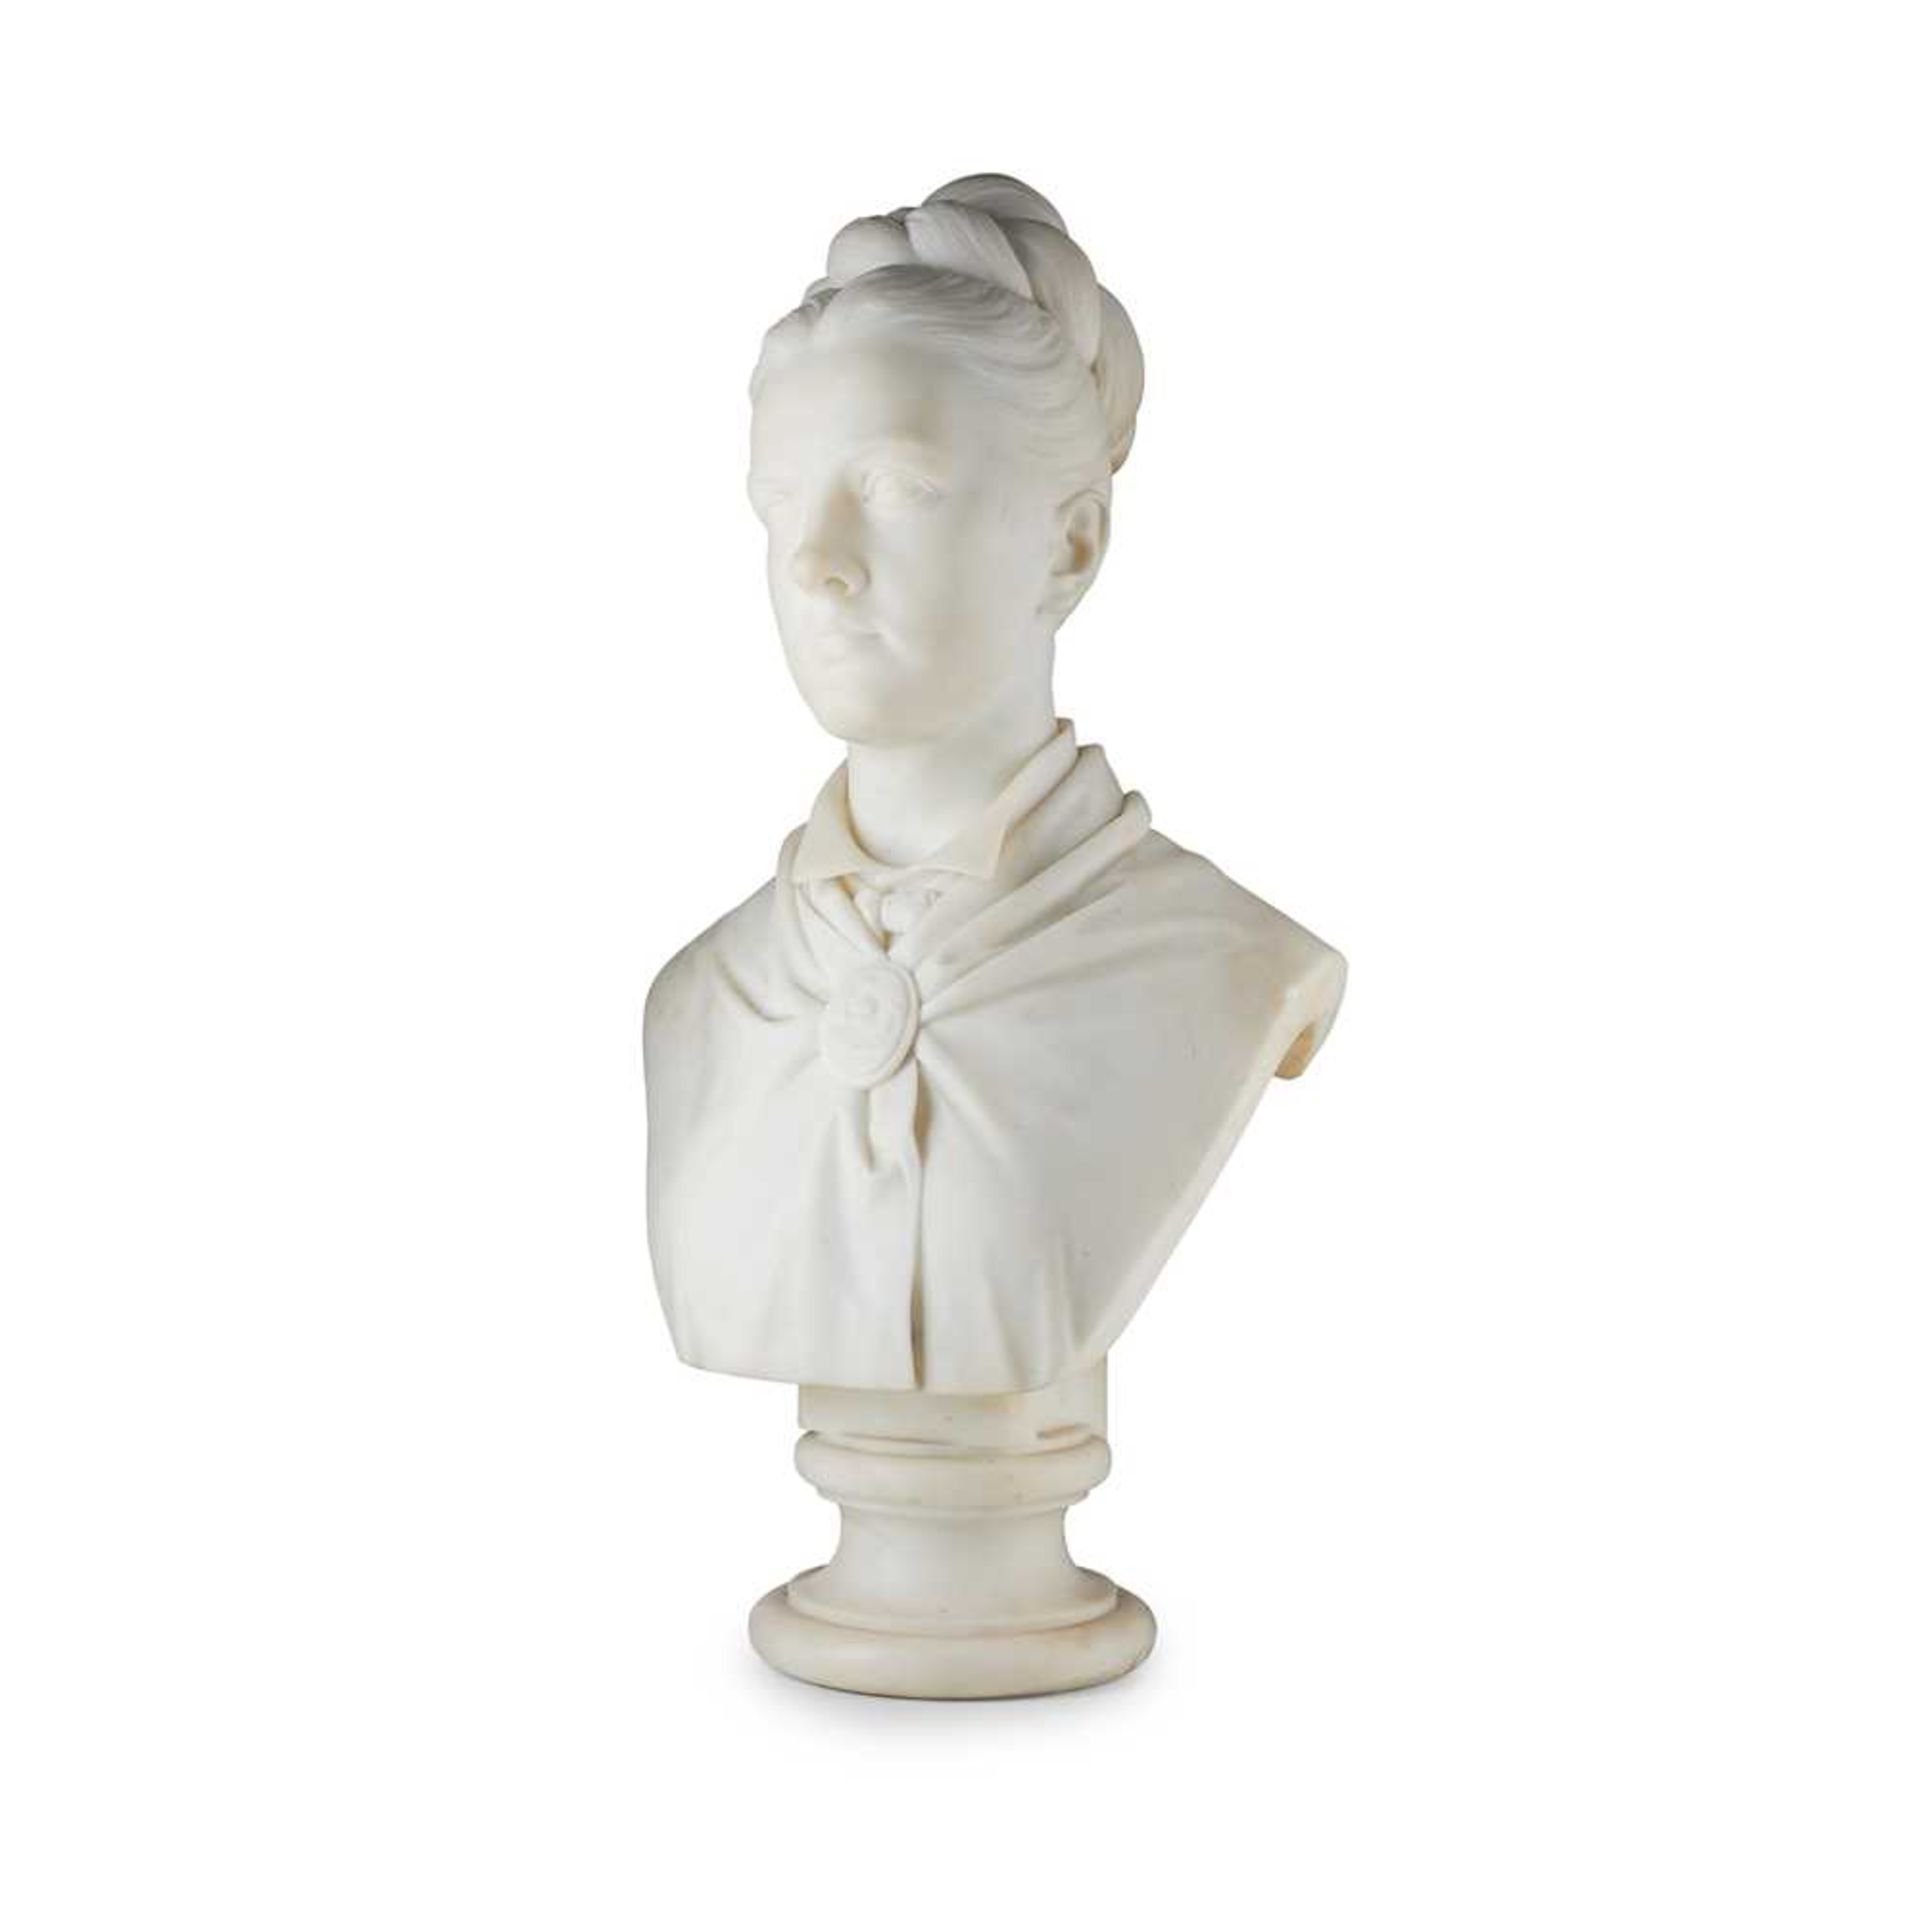 GIOSUÈ ARGENTI (ITALIAN, 1819-1901) MARBLE BUST OF A YOUNG WOMAN, DATED 1875